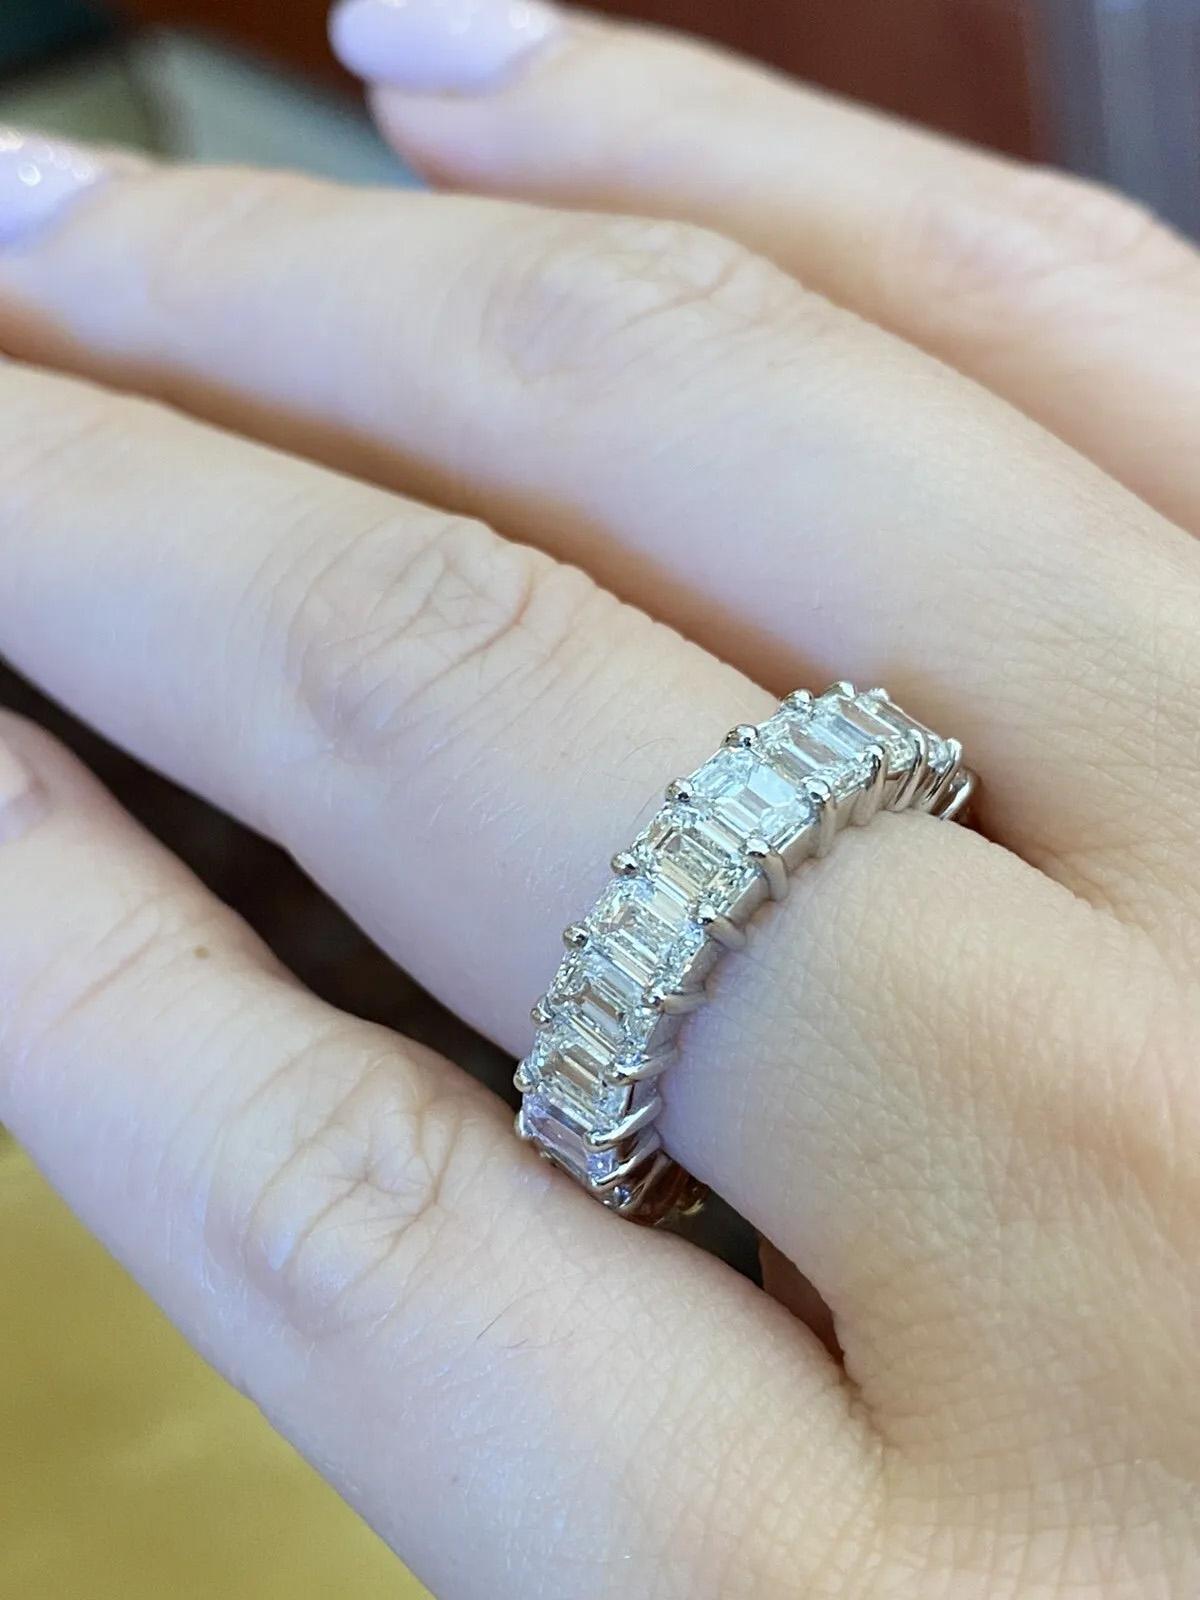 Emerald Cut Diamond Eternity Band Ring 6.40 Carats Total in Platinum Size 6.25 For Sale 2